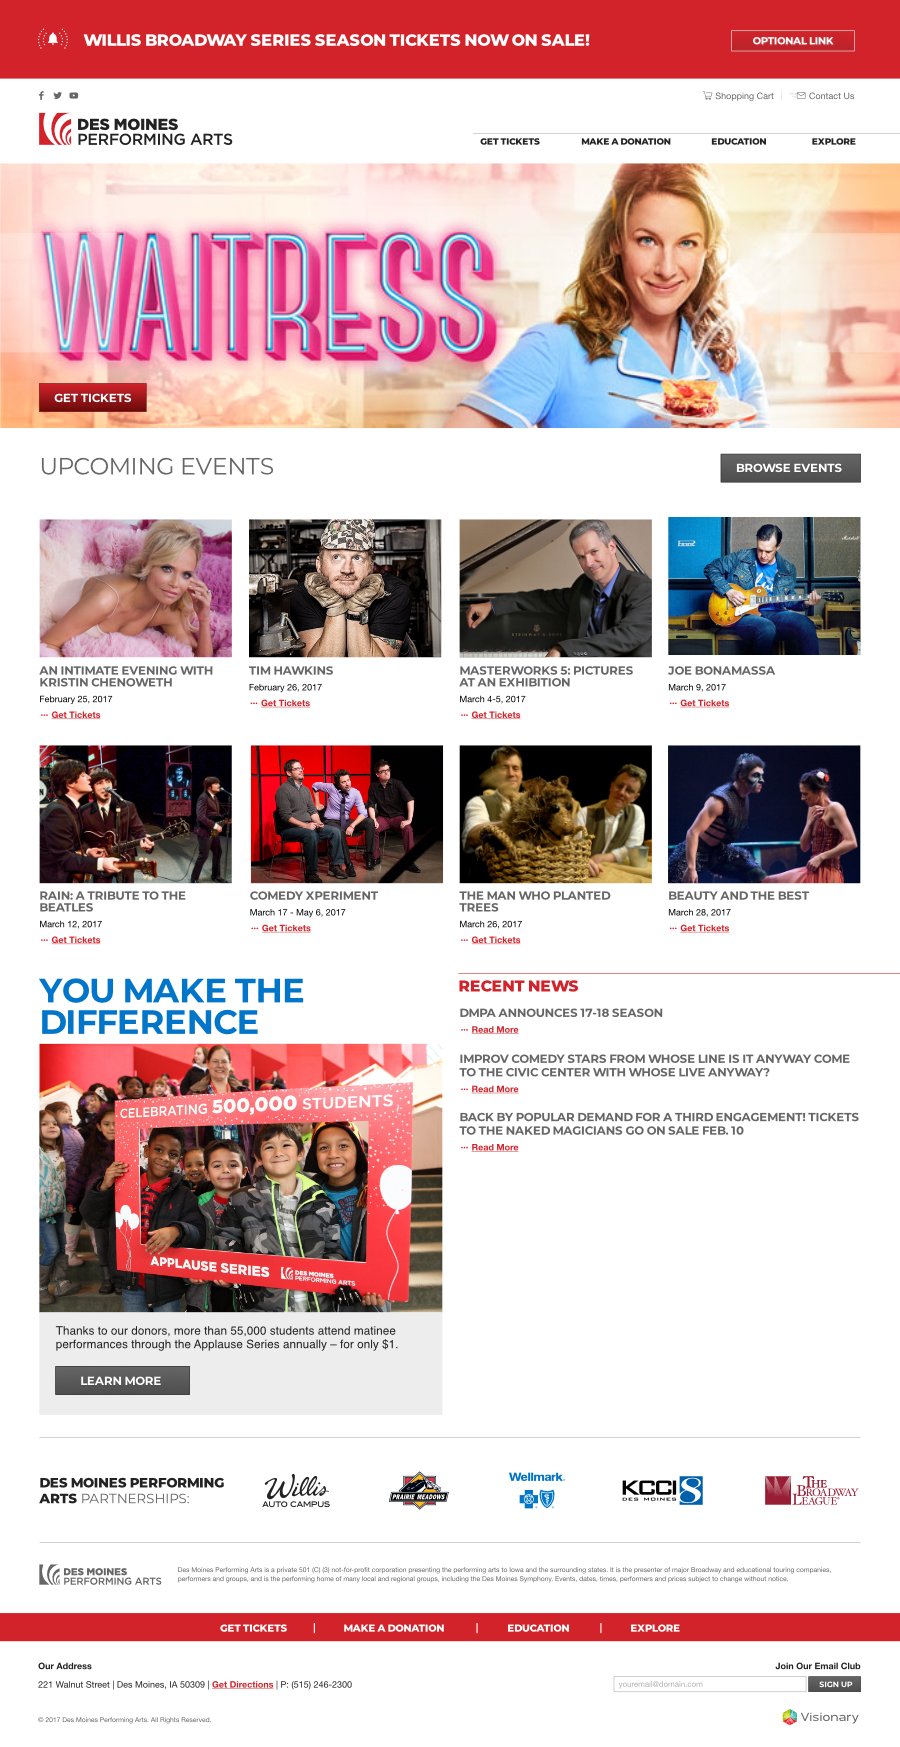 mockup of the new website's homepage showing a banner image and a grid of events